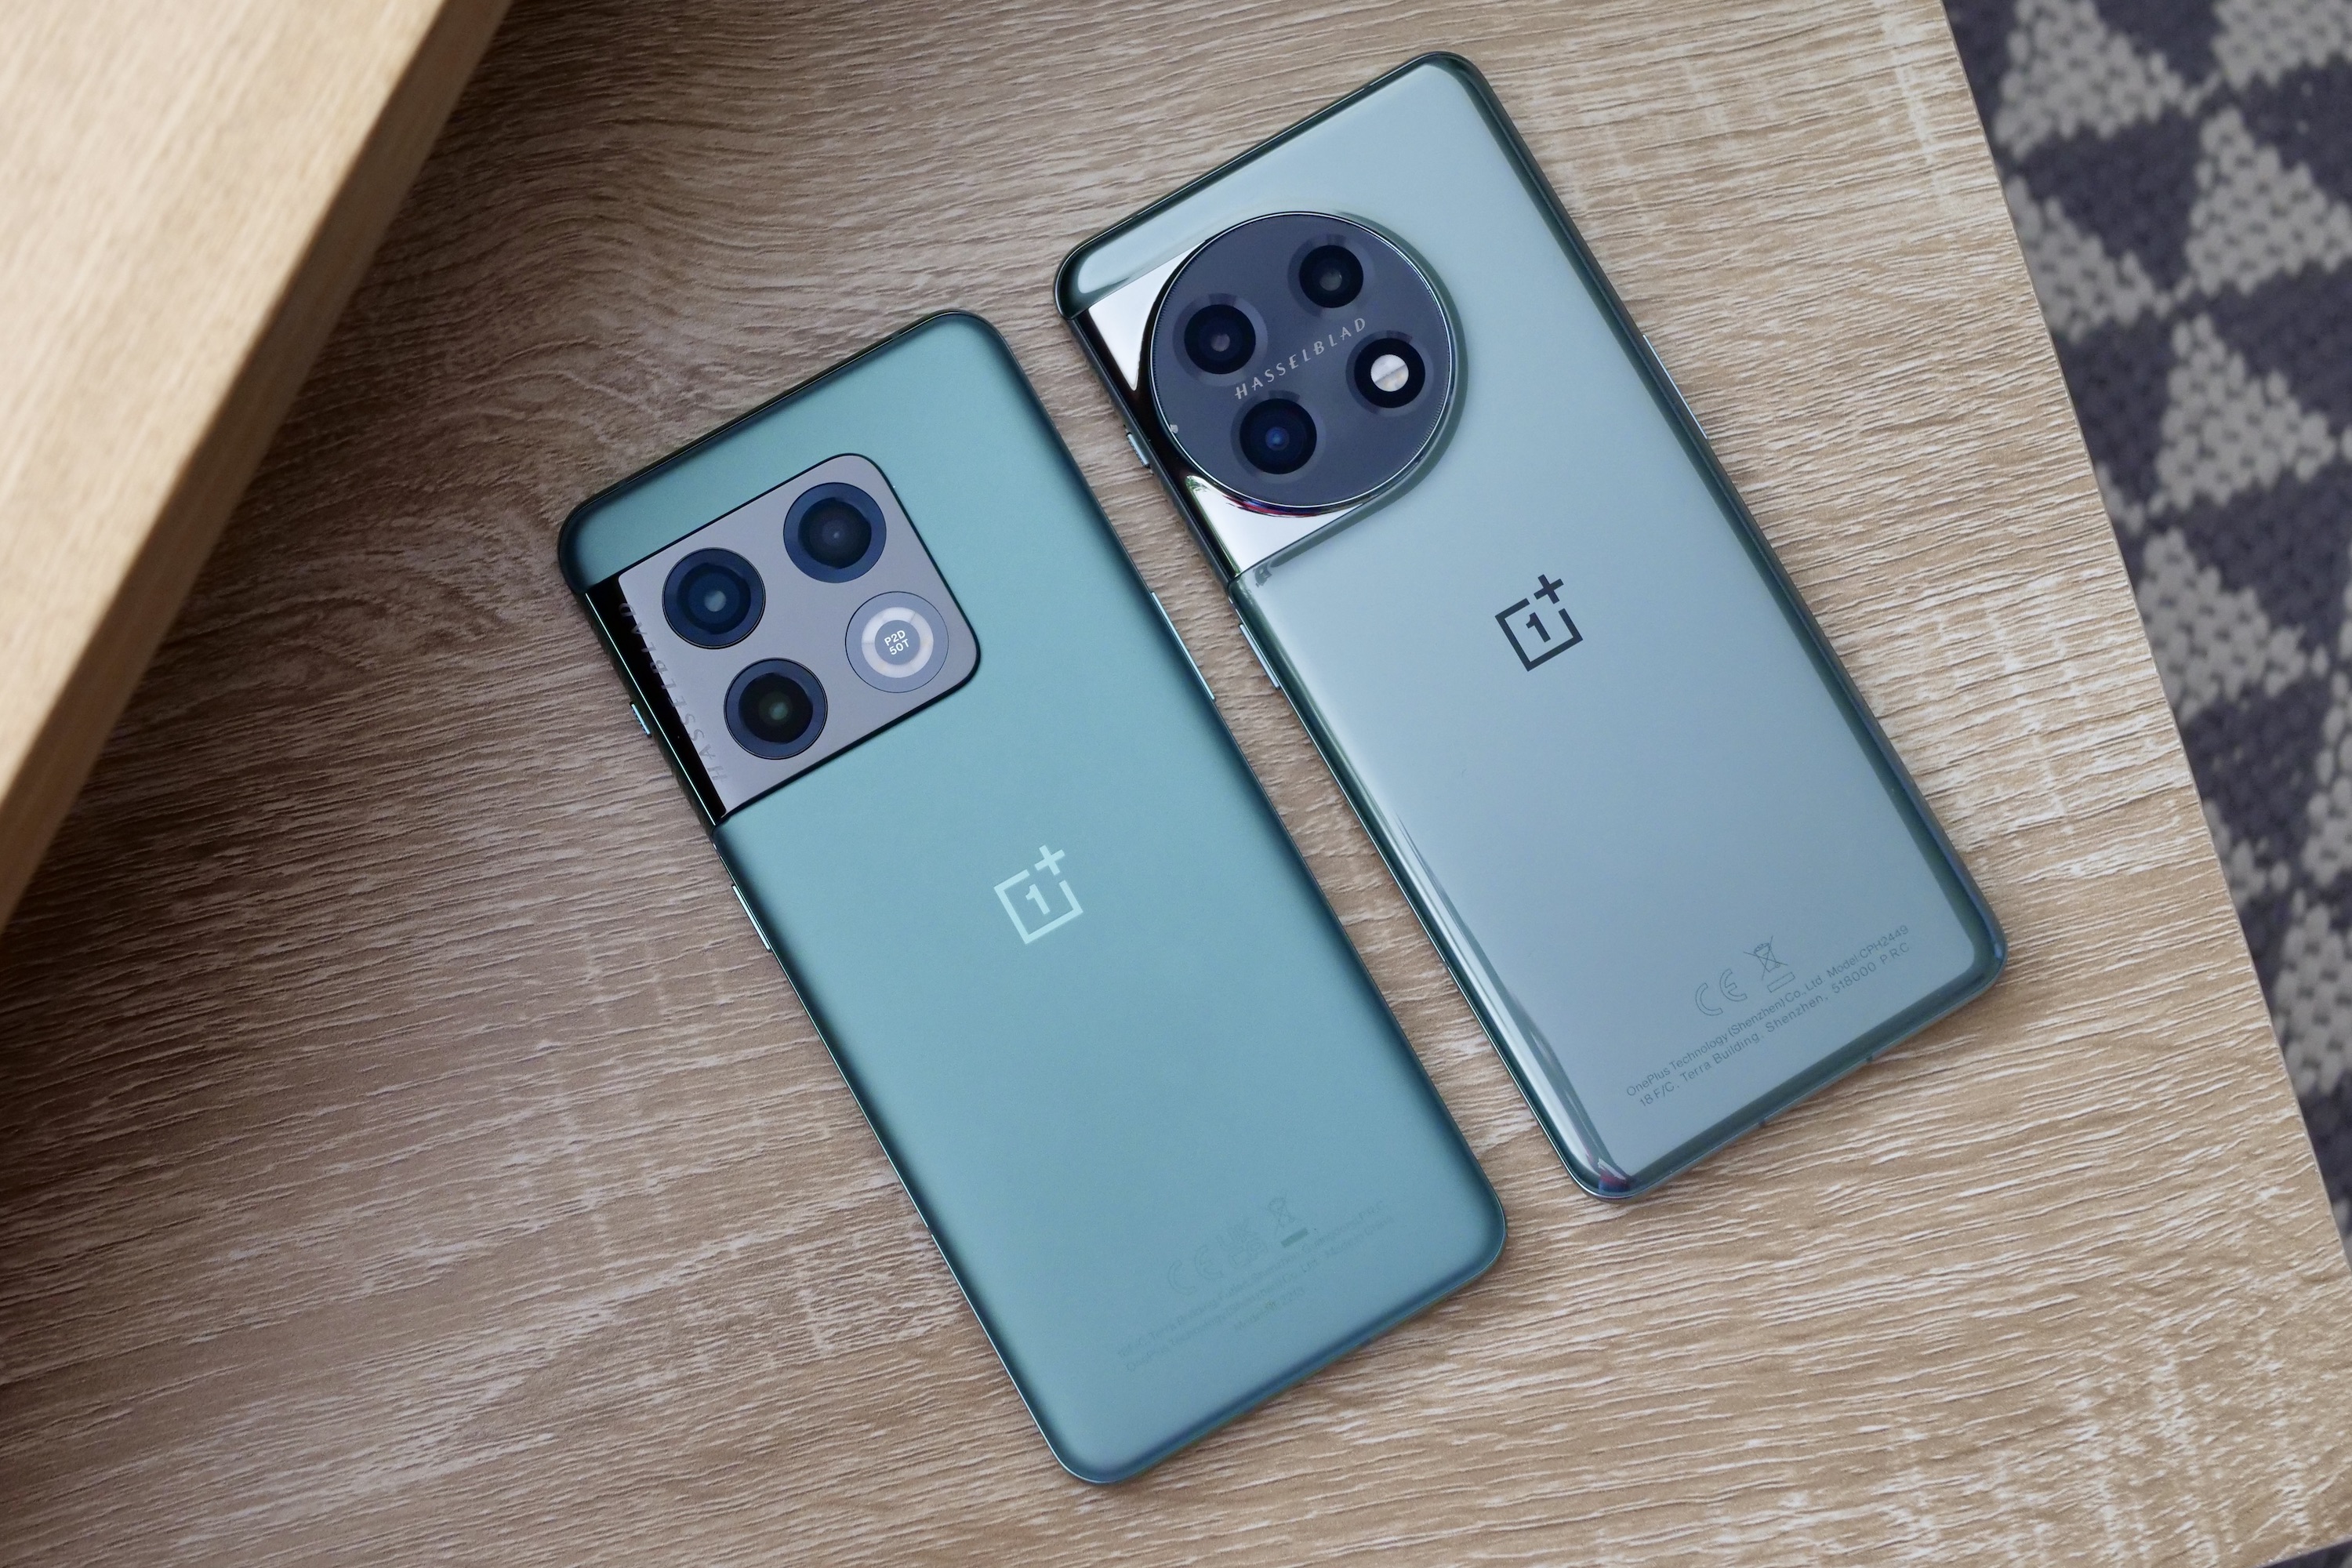 The back of the OnePlus 11 and OnePlus 10 Pro.